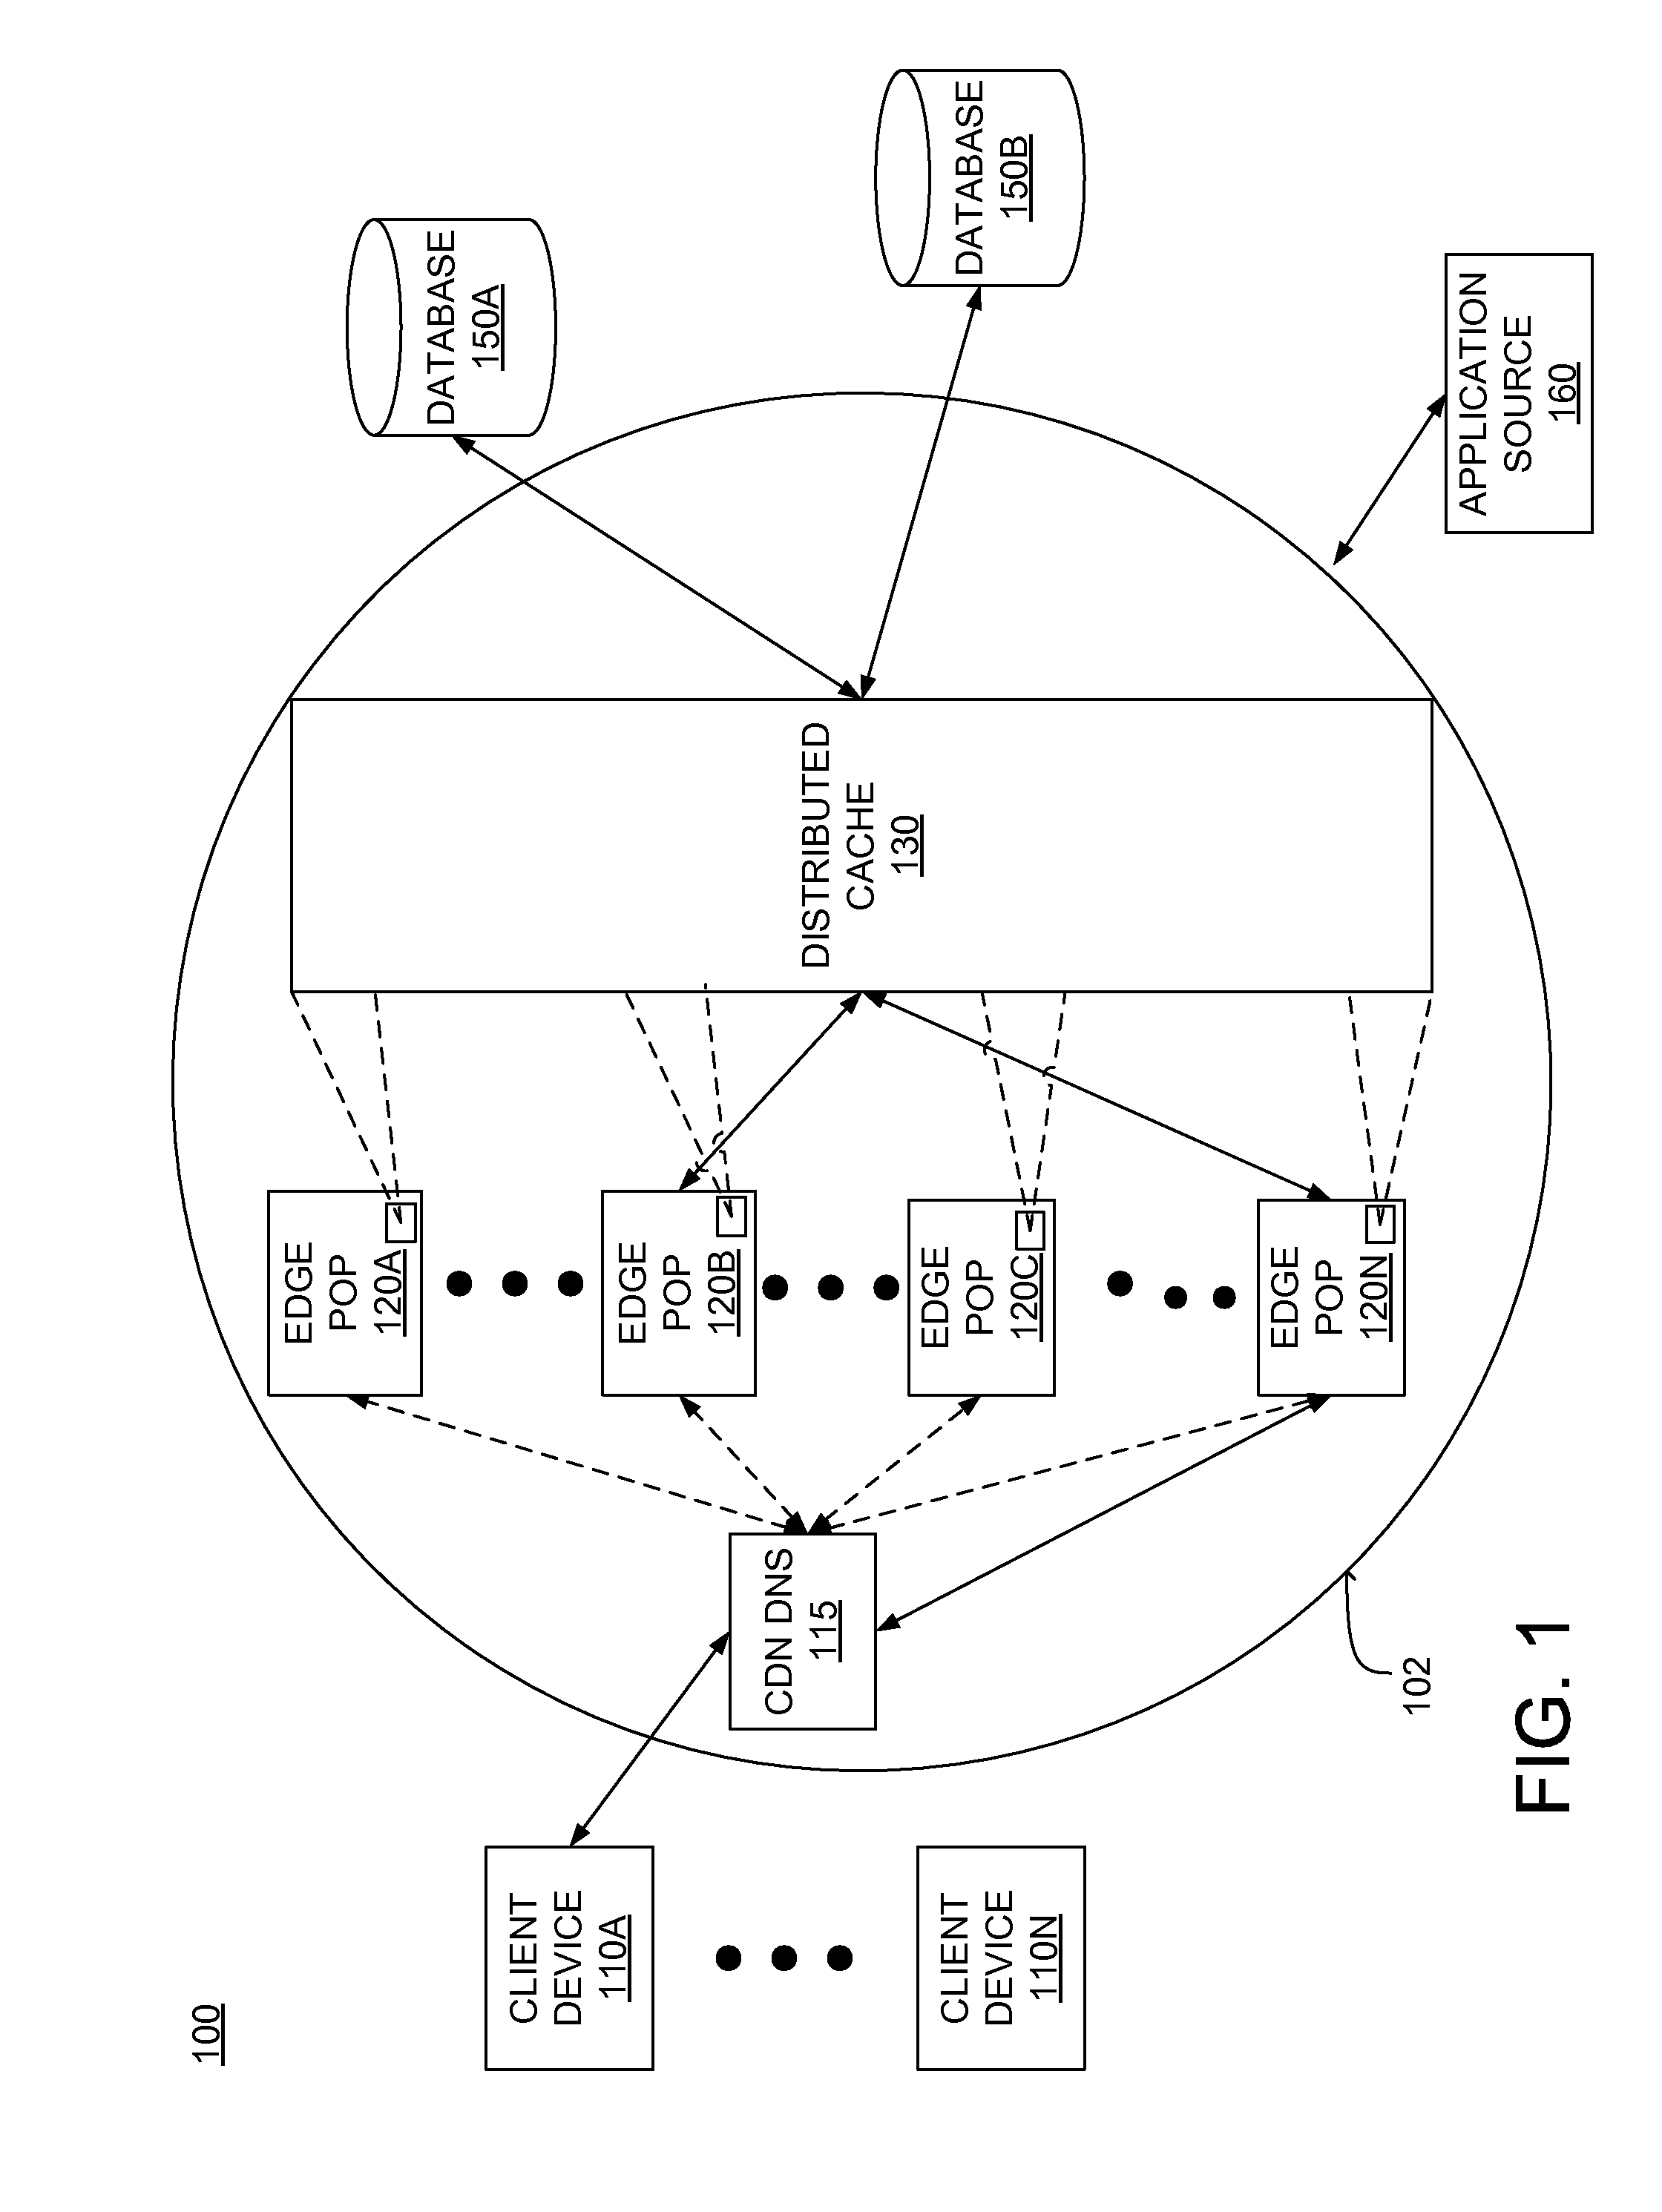 Distributed data cache for on-demand application acceleration